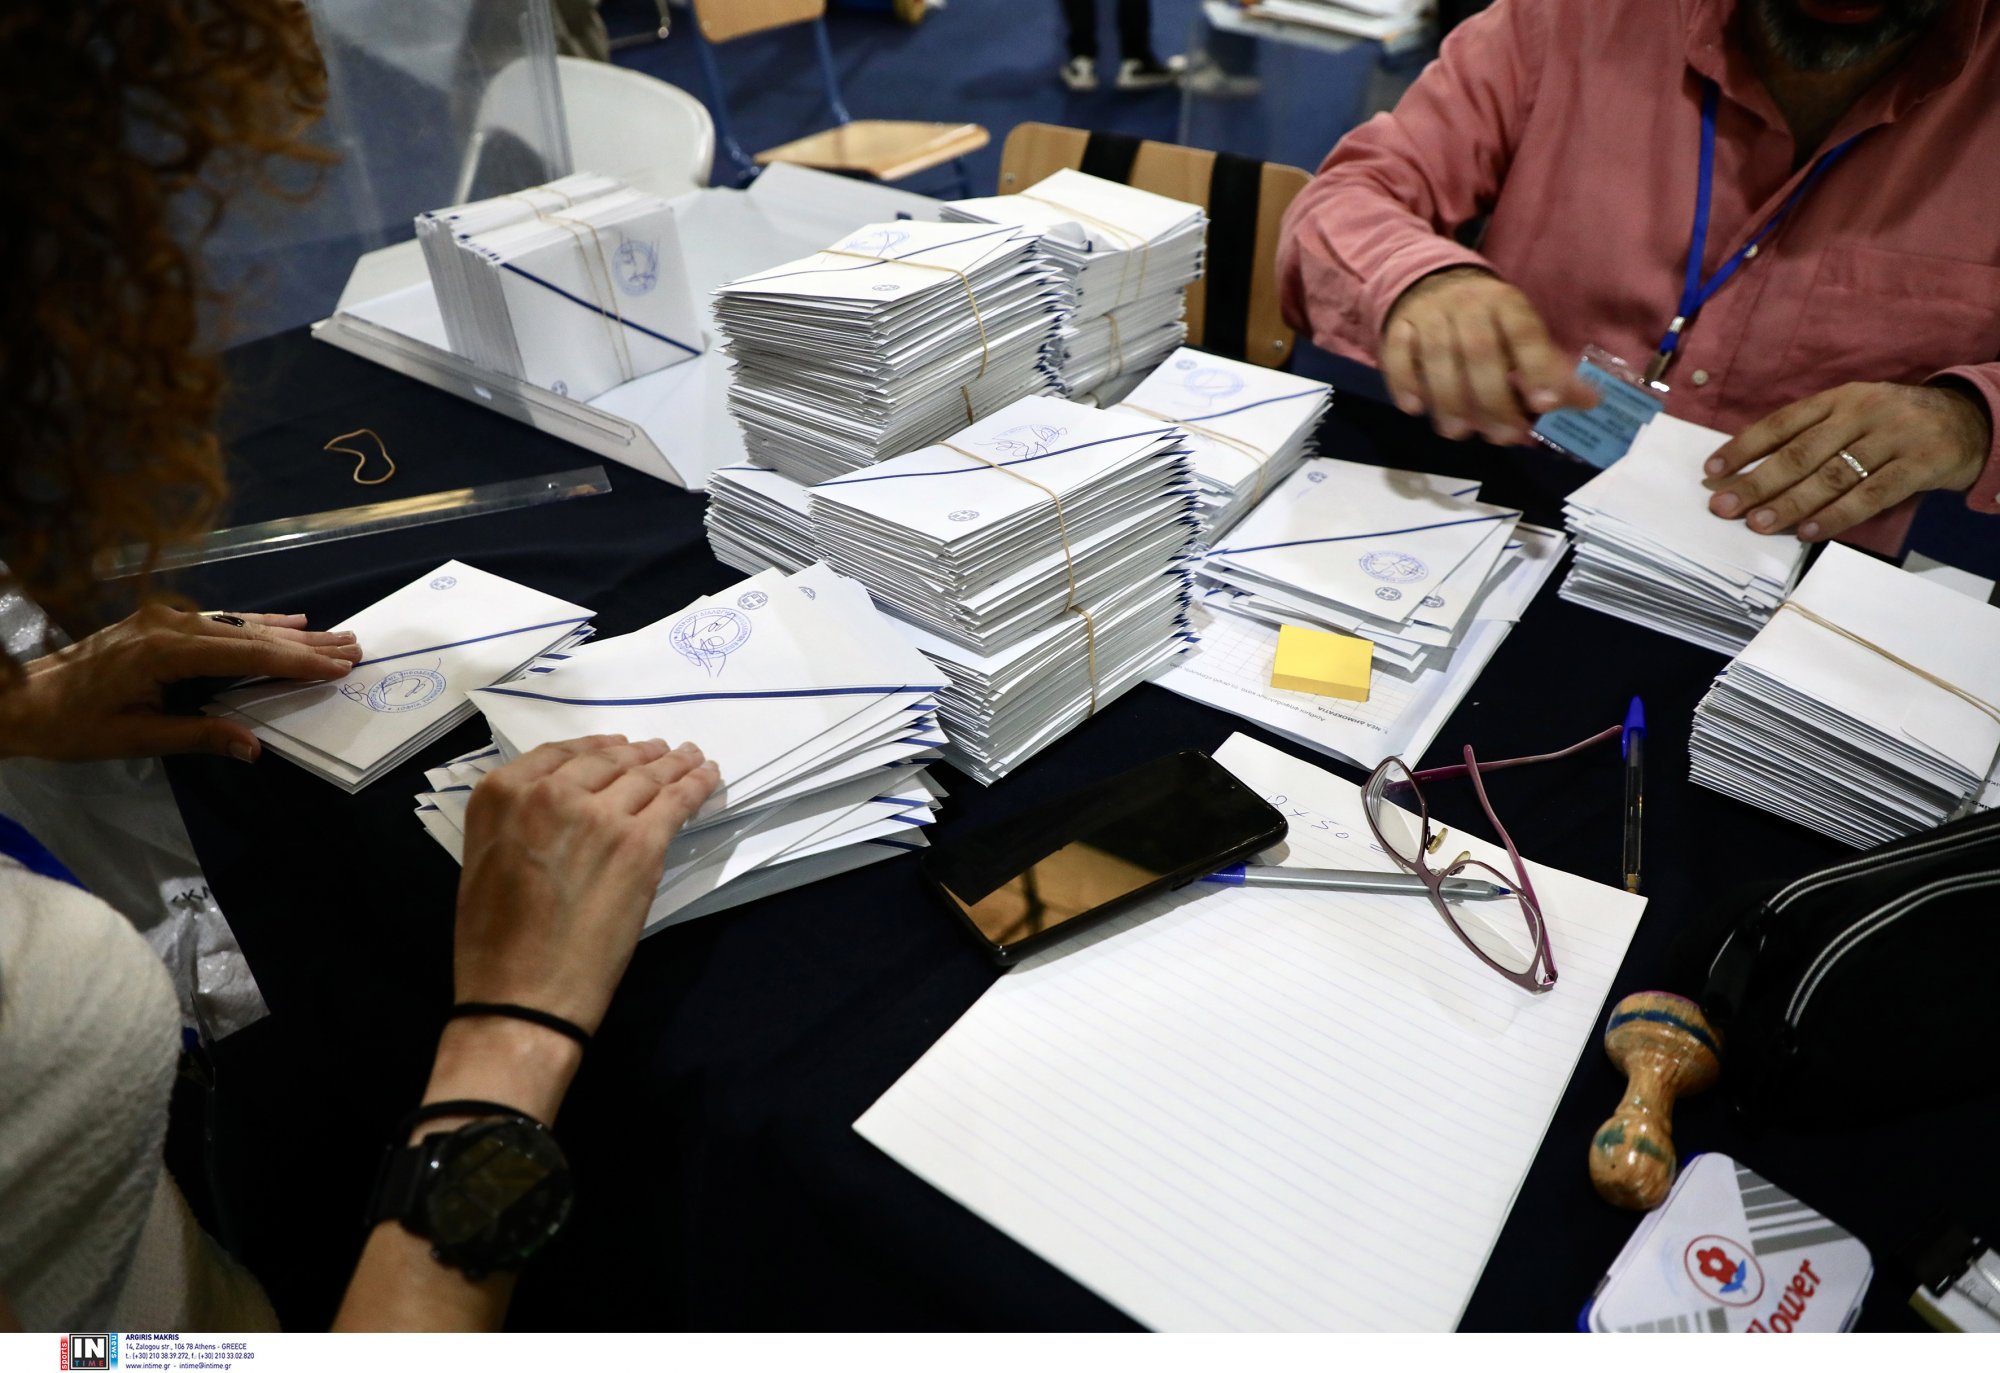 Electoral officials sorting mail in ballots from abroad